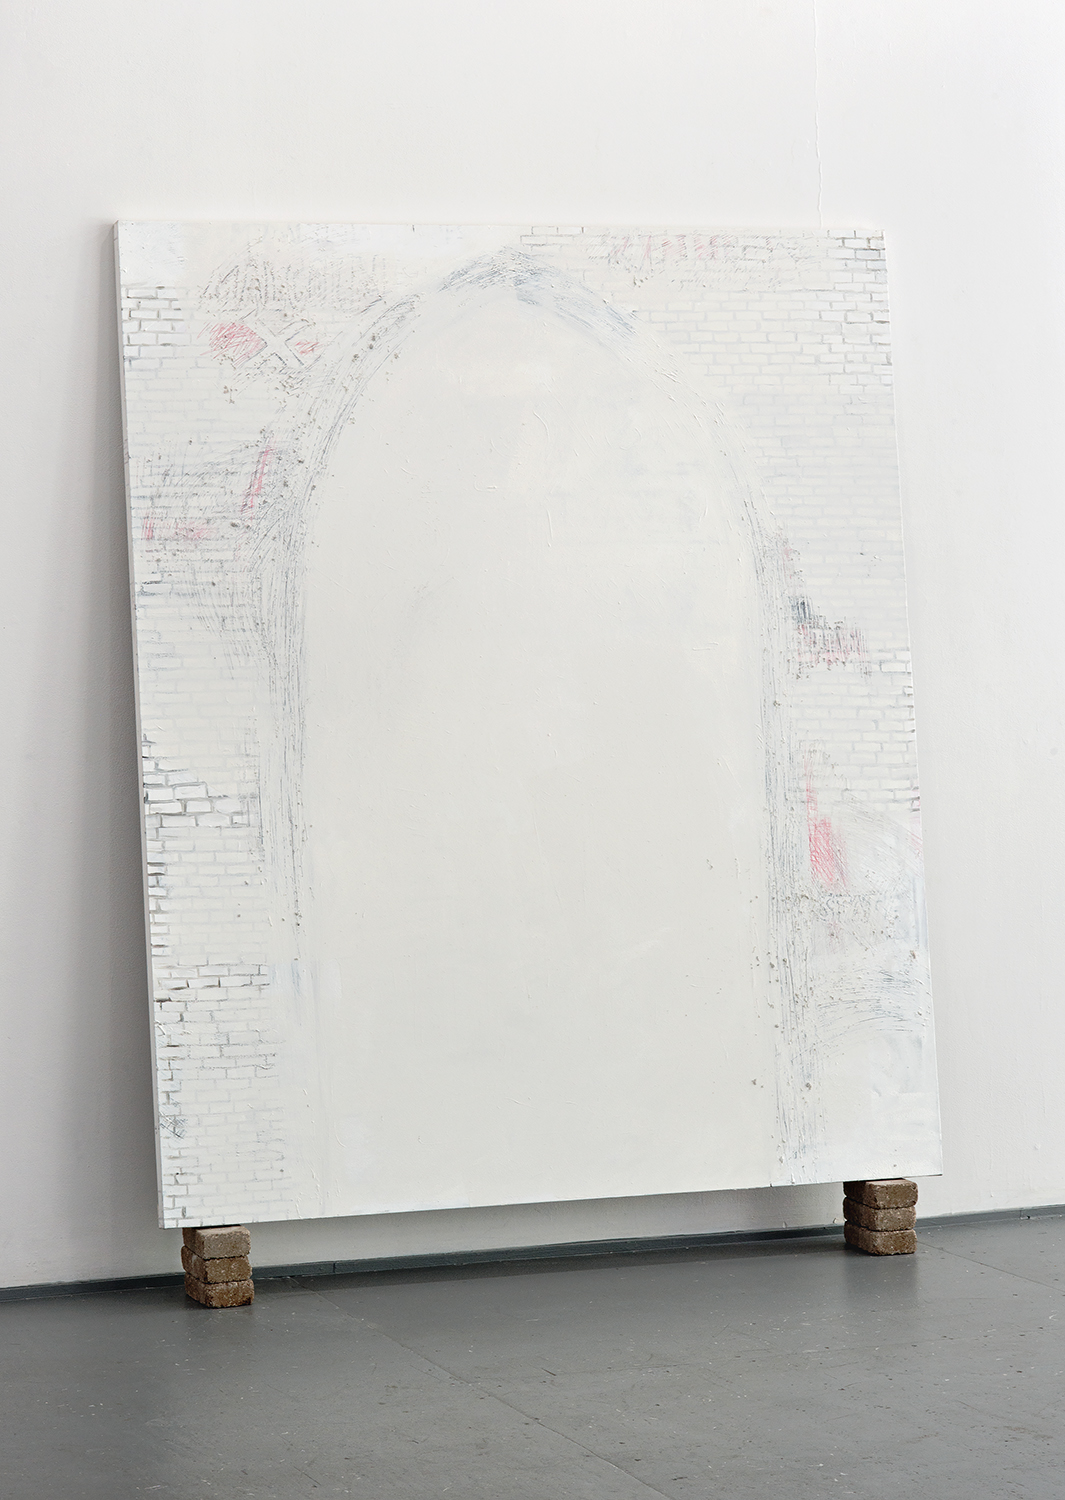 Panel from Whitewashed: All of Mankind by Haerim Lee. A large textured white canvas shows the outline of an arch. The white paint inside the arch is thicker and more opaque. The area surrounding the arch replicates the texture of whitewashed brick with paint starting to flake away. Image courtesy of Greg Ruffing. 